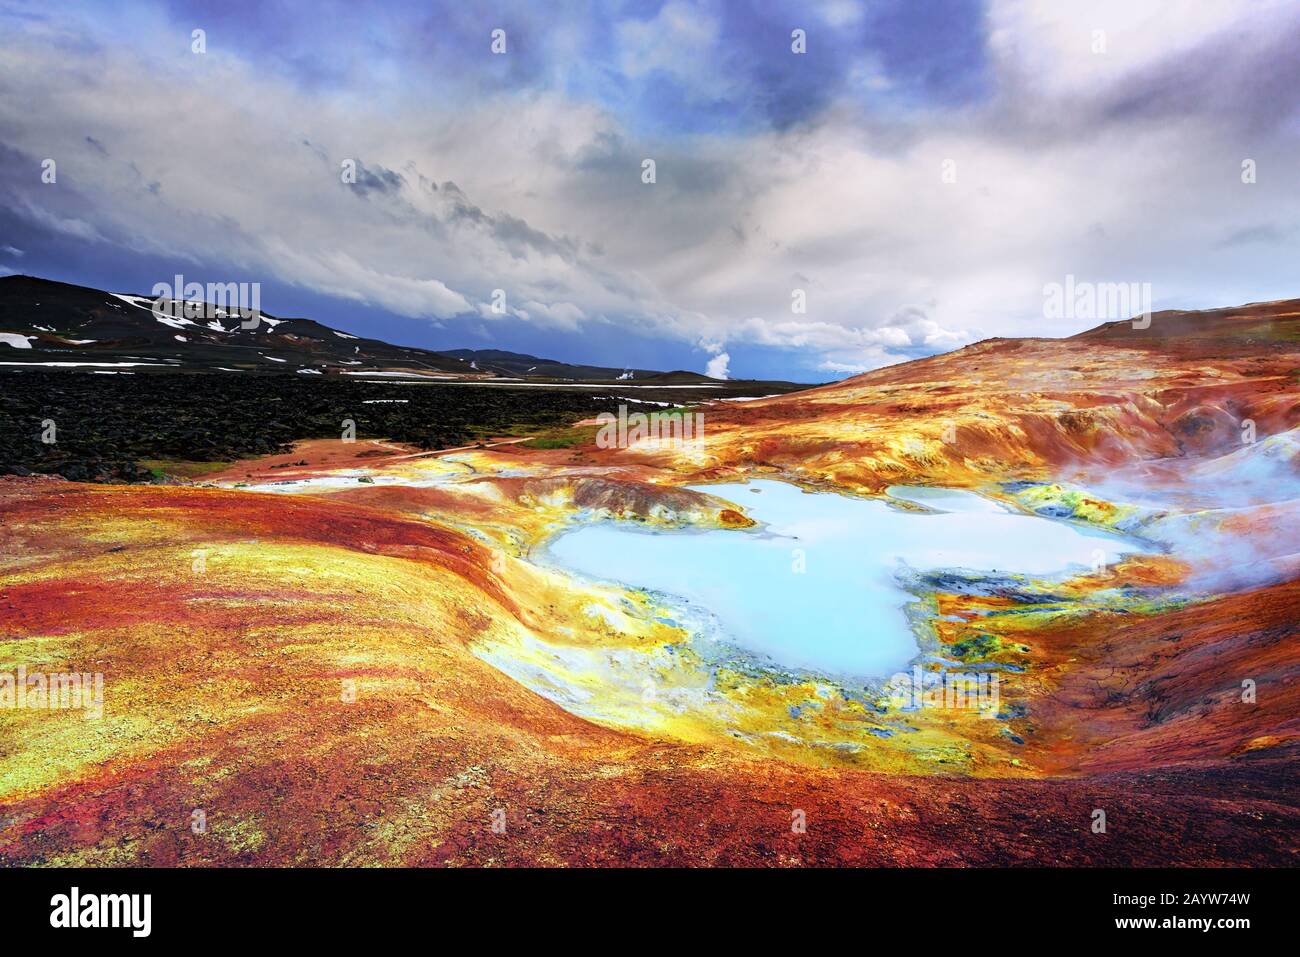 Acid hot lake with turquoise water in the geothermal valley Leirhnjukur, near Krafla volcano, Iceland, Europe. Landscape photography Stock Photo